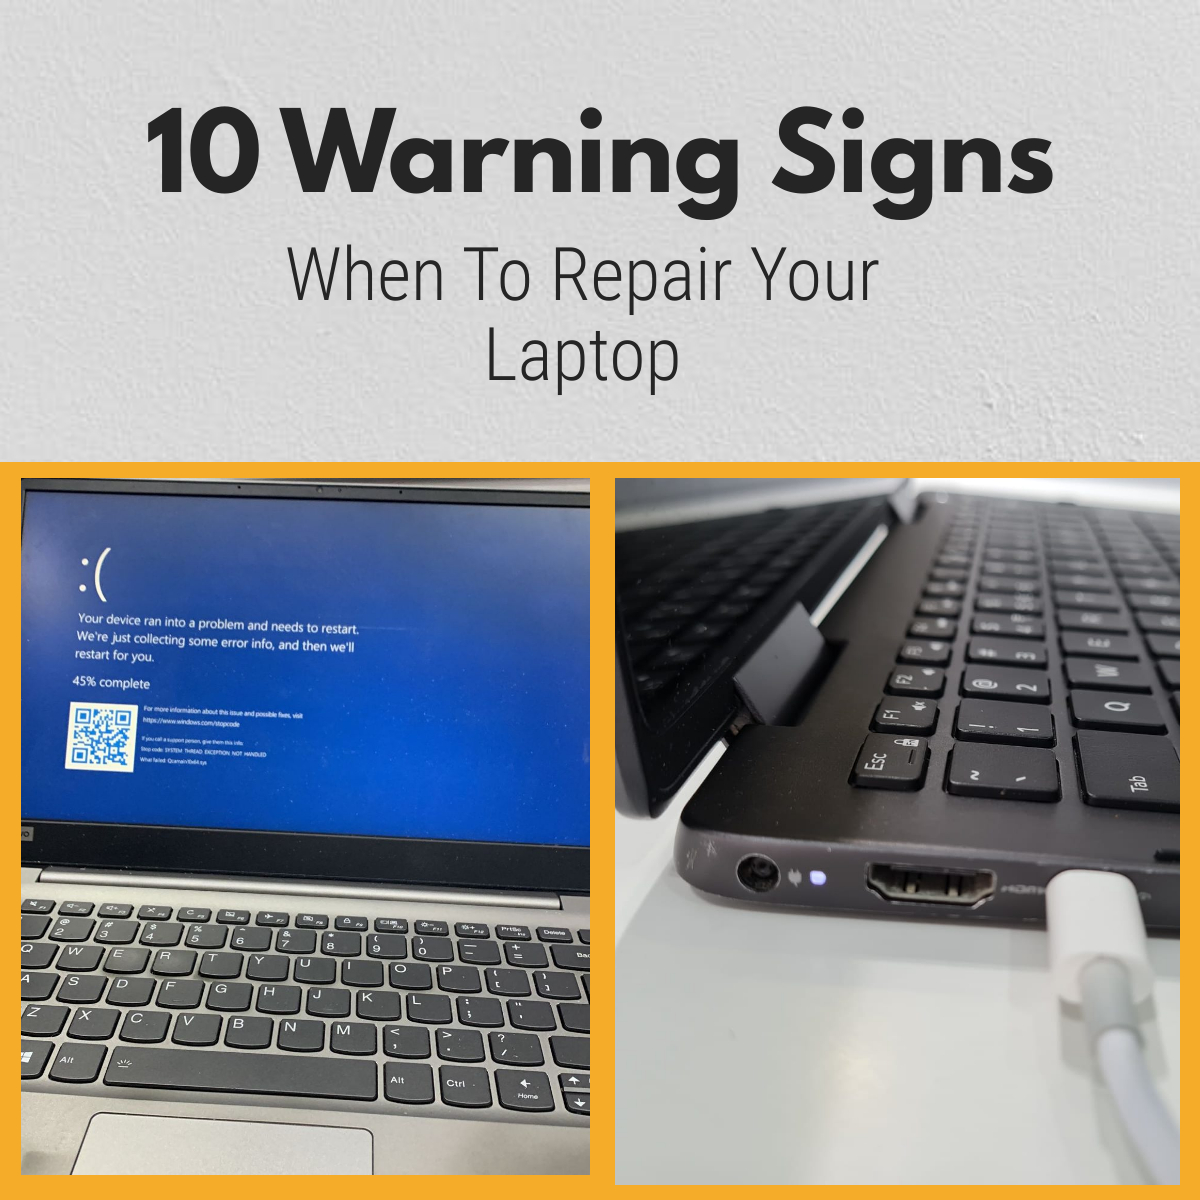 Consider if your laptop is still working.